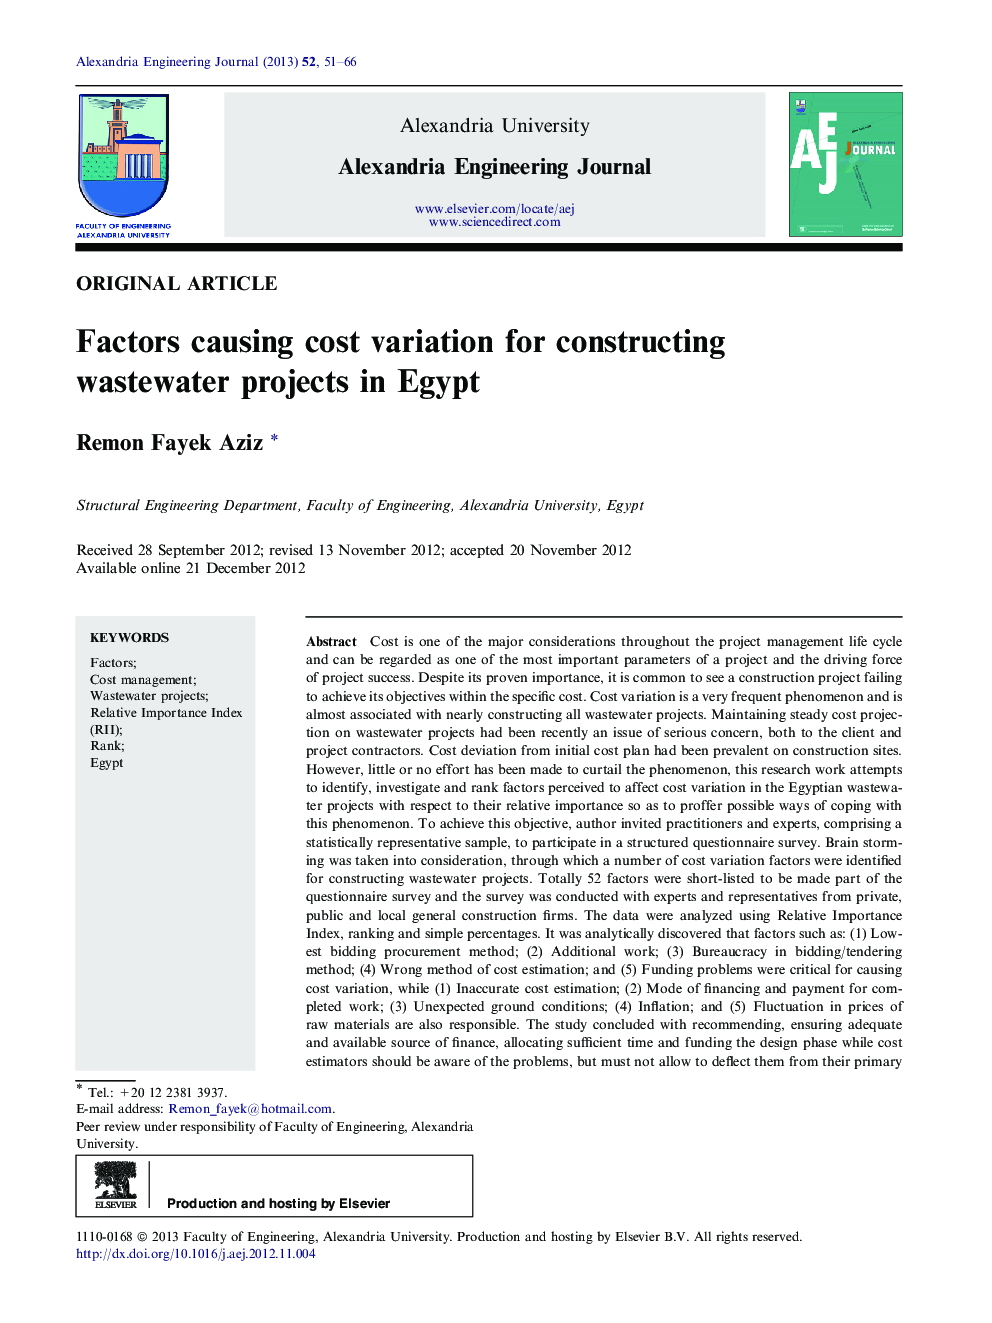 Factors causing cost variation for constructing wastewater projects in Egypt 